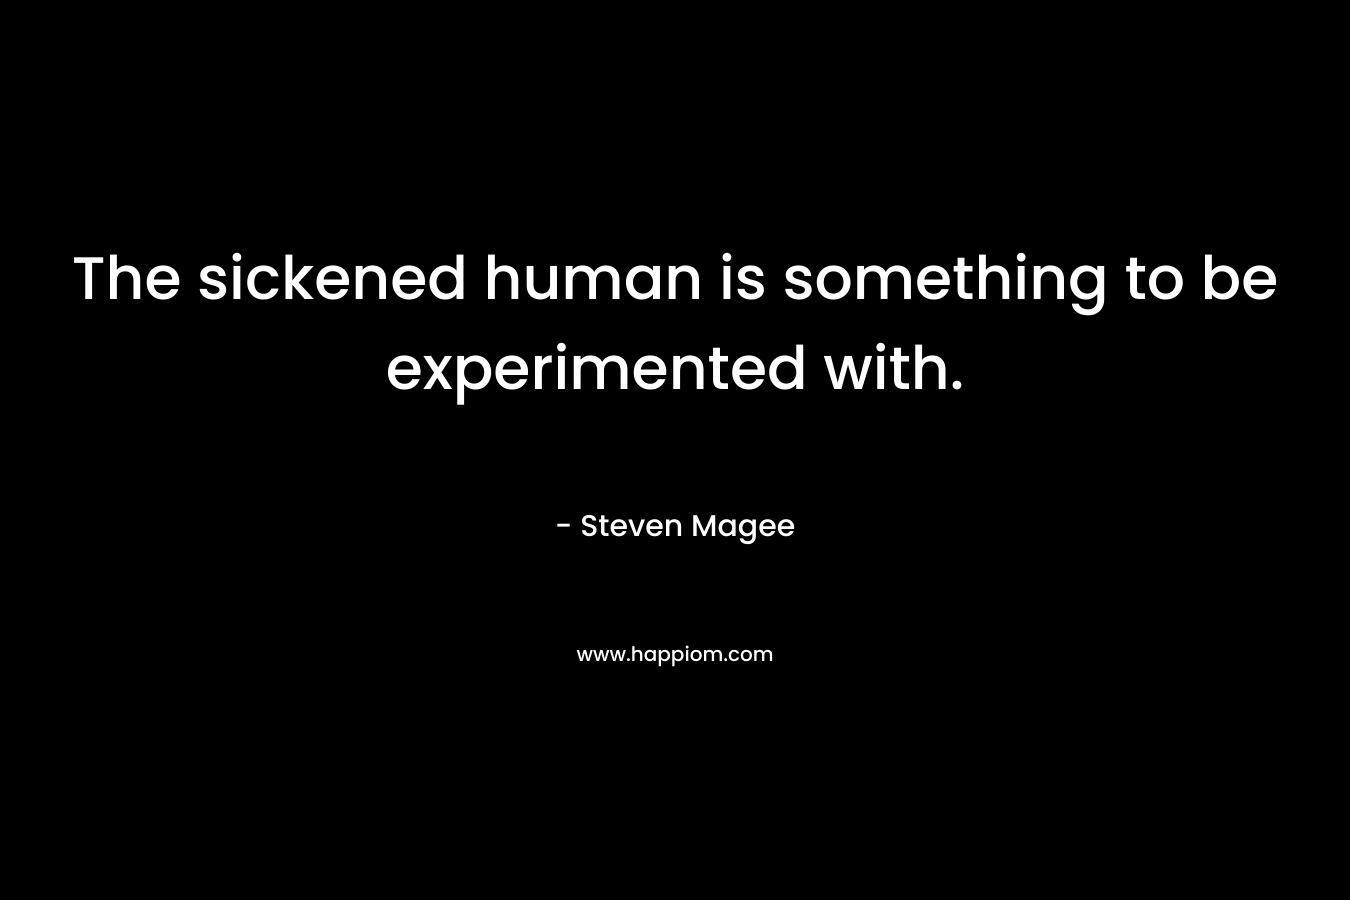 The sickened human is something to be experimented with.